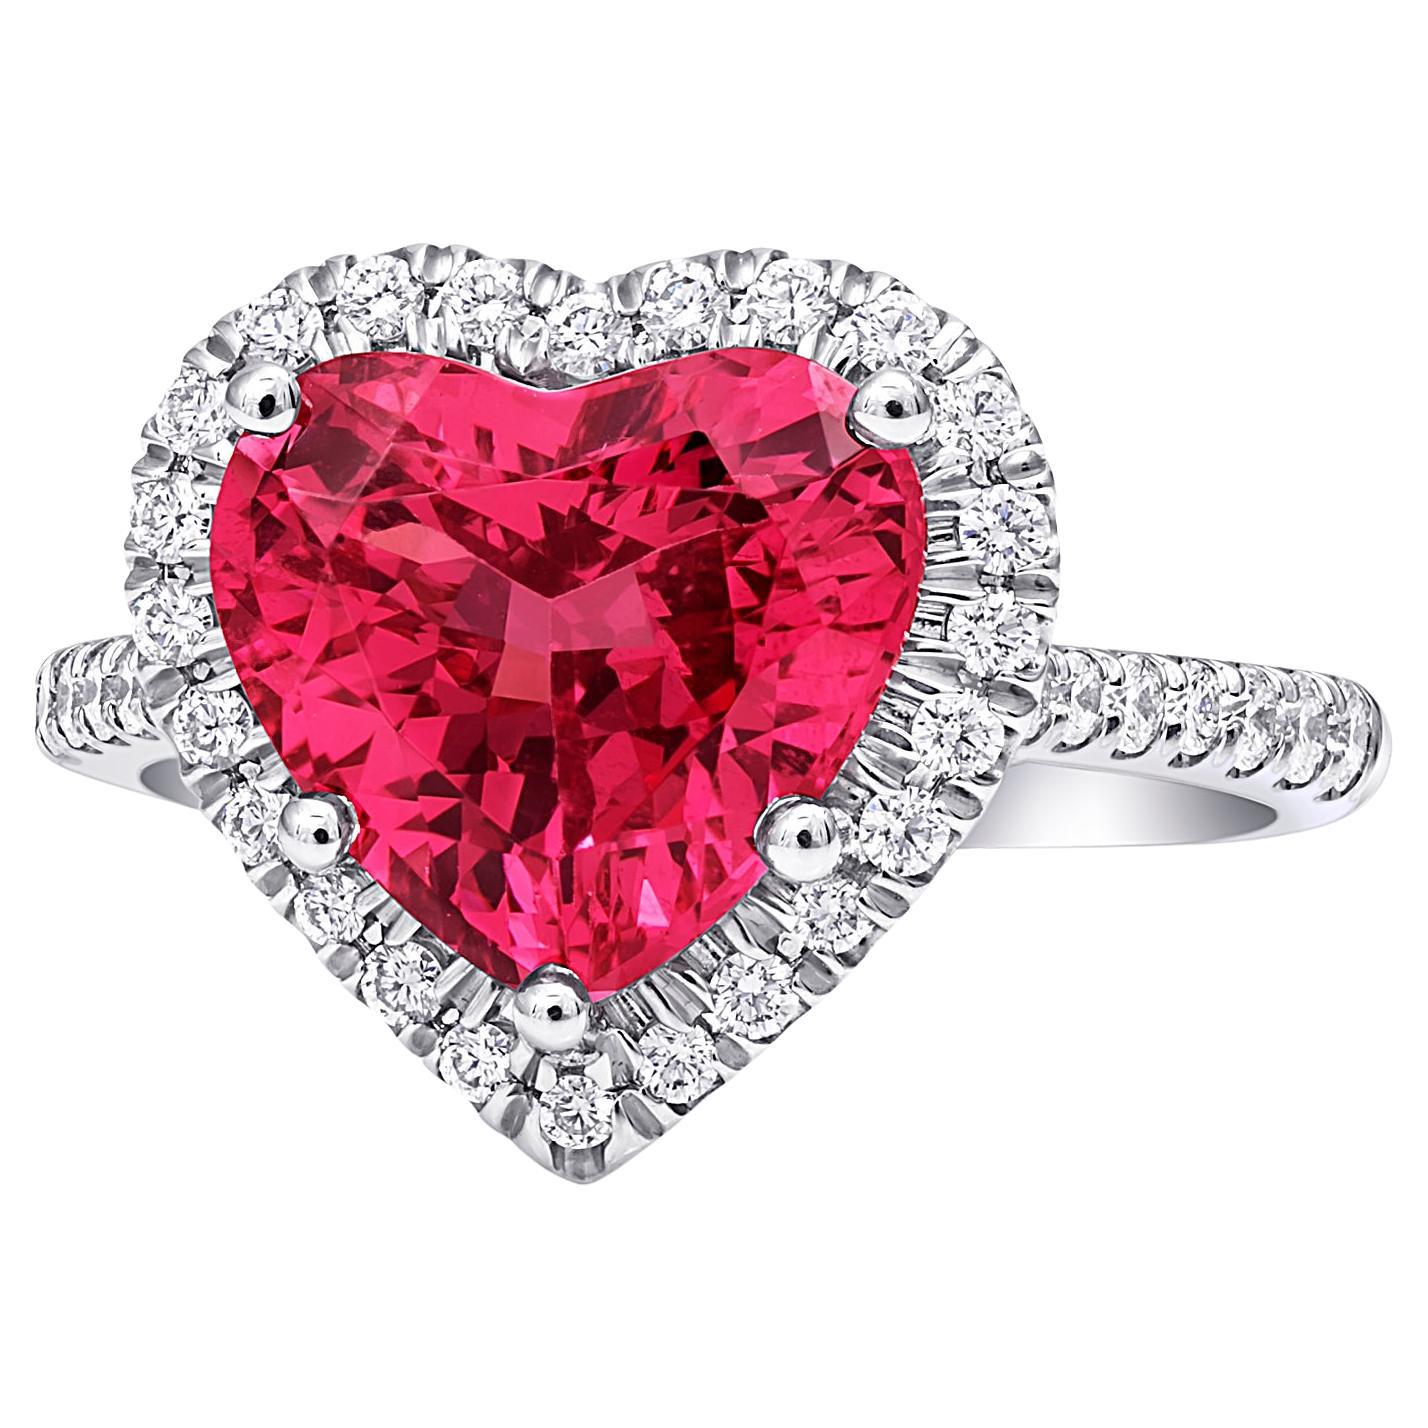 GRS Certified 3.90 Carats Mahenge Pink Spinel Diamonds set in Platinum Ring